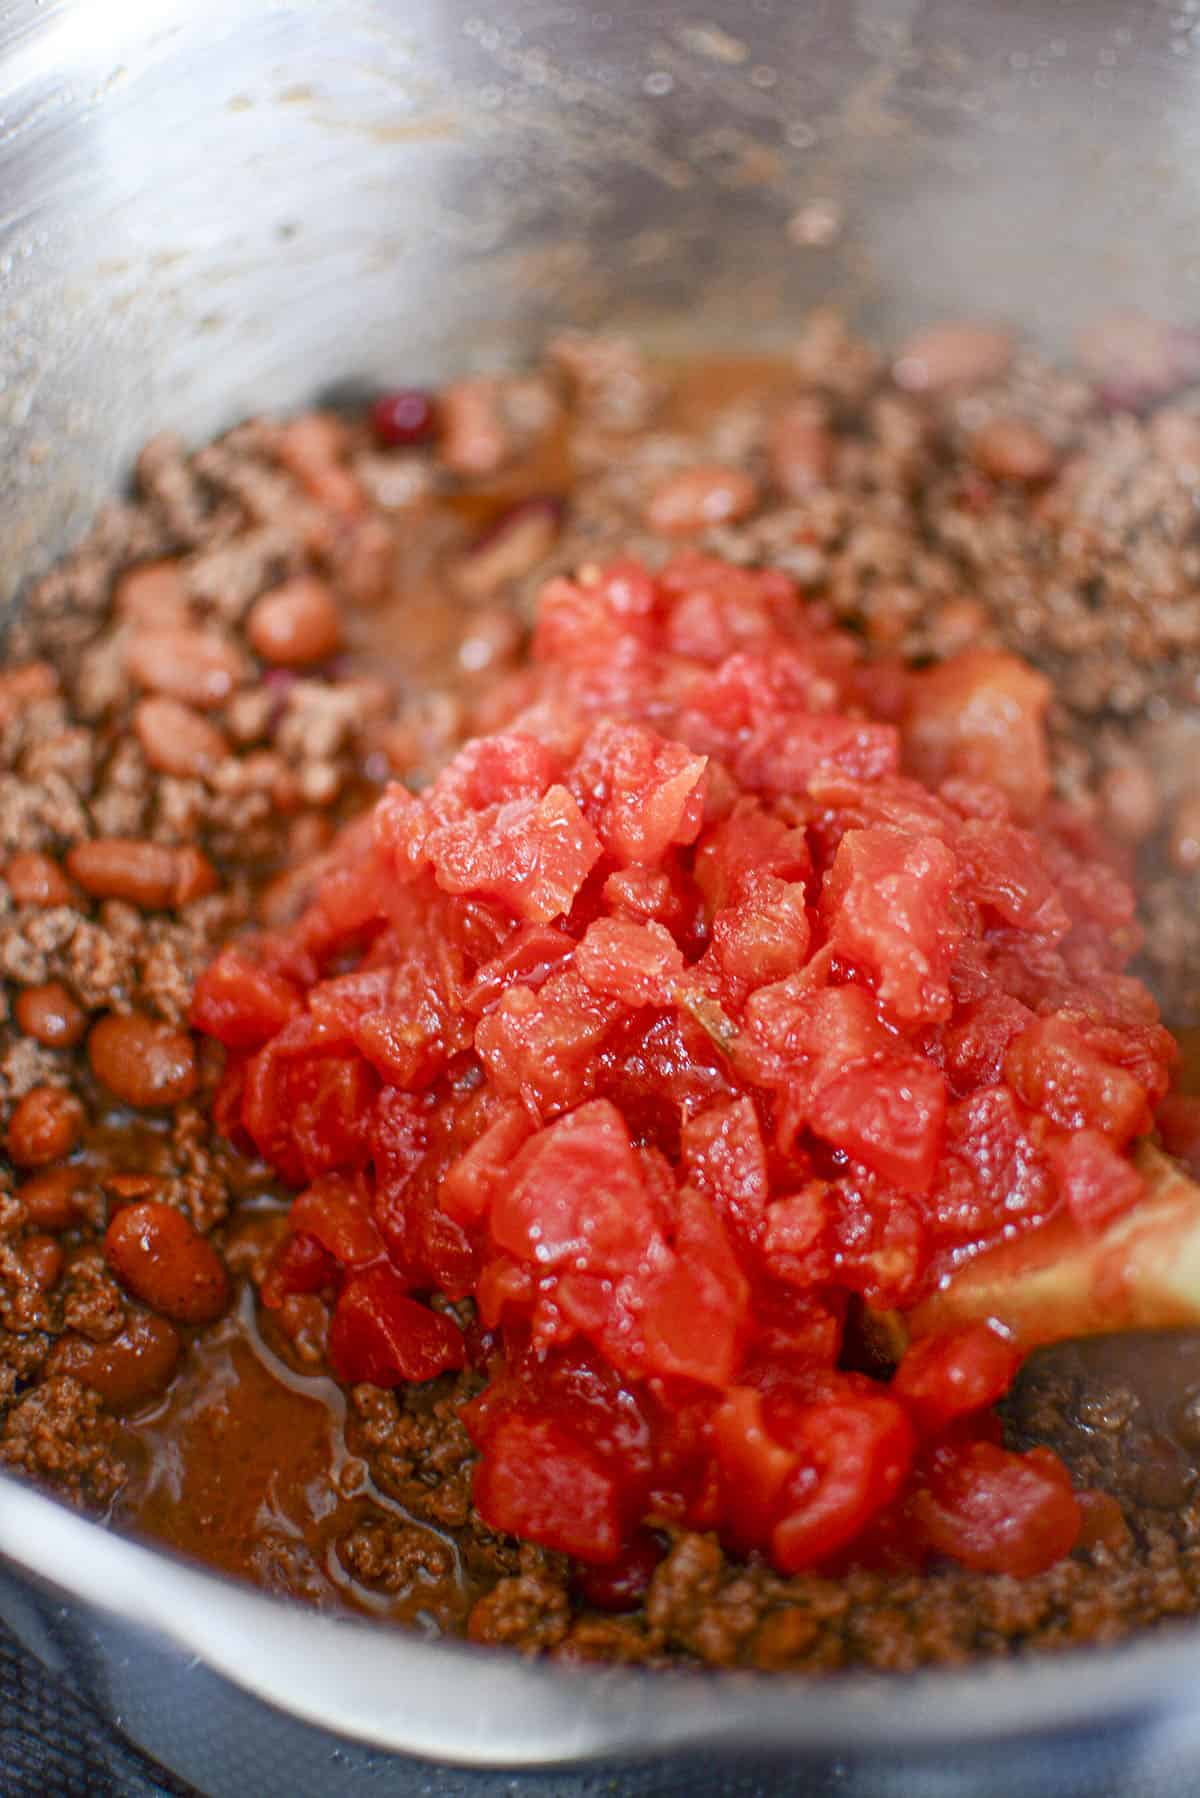 Rotel is added to the ground beef in the pot.